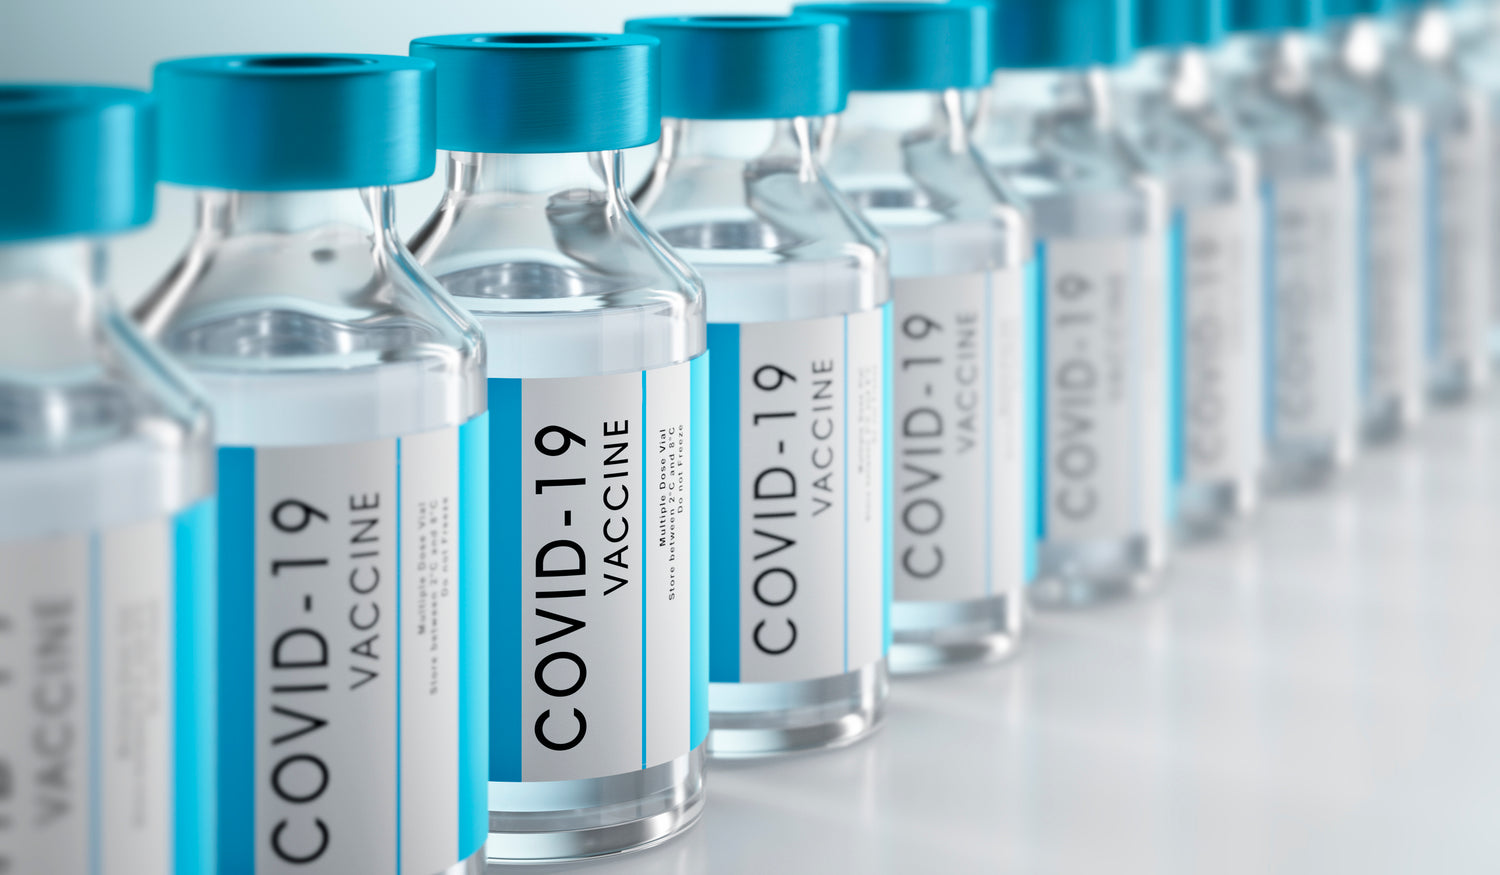 94% of VisiVite eye vitamin customers are fully vaccinated against Covid-19